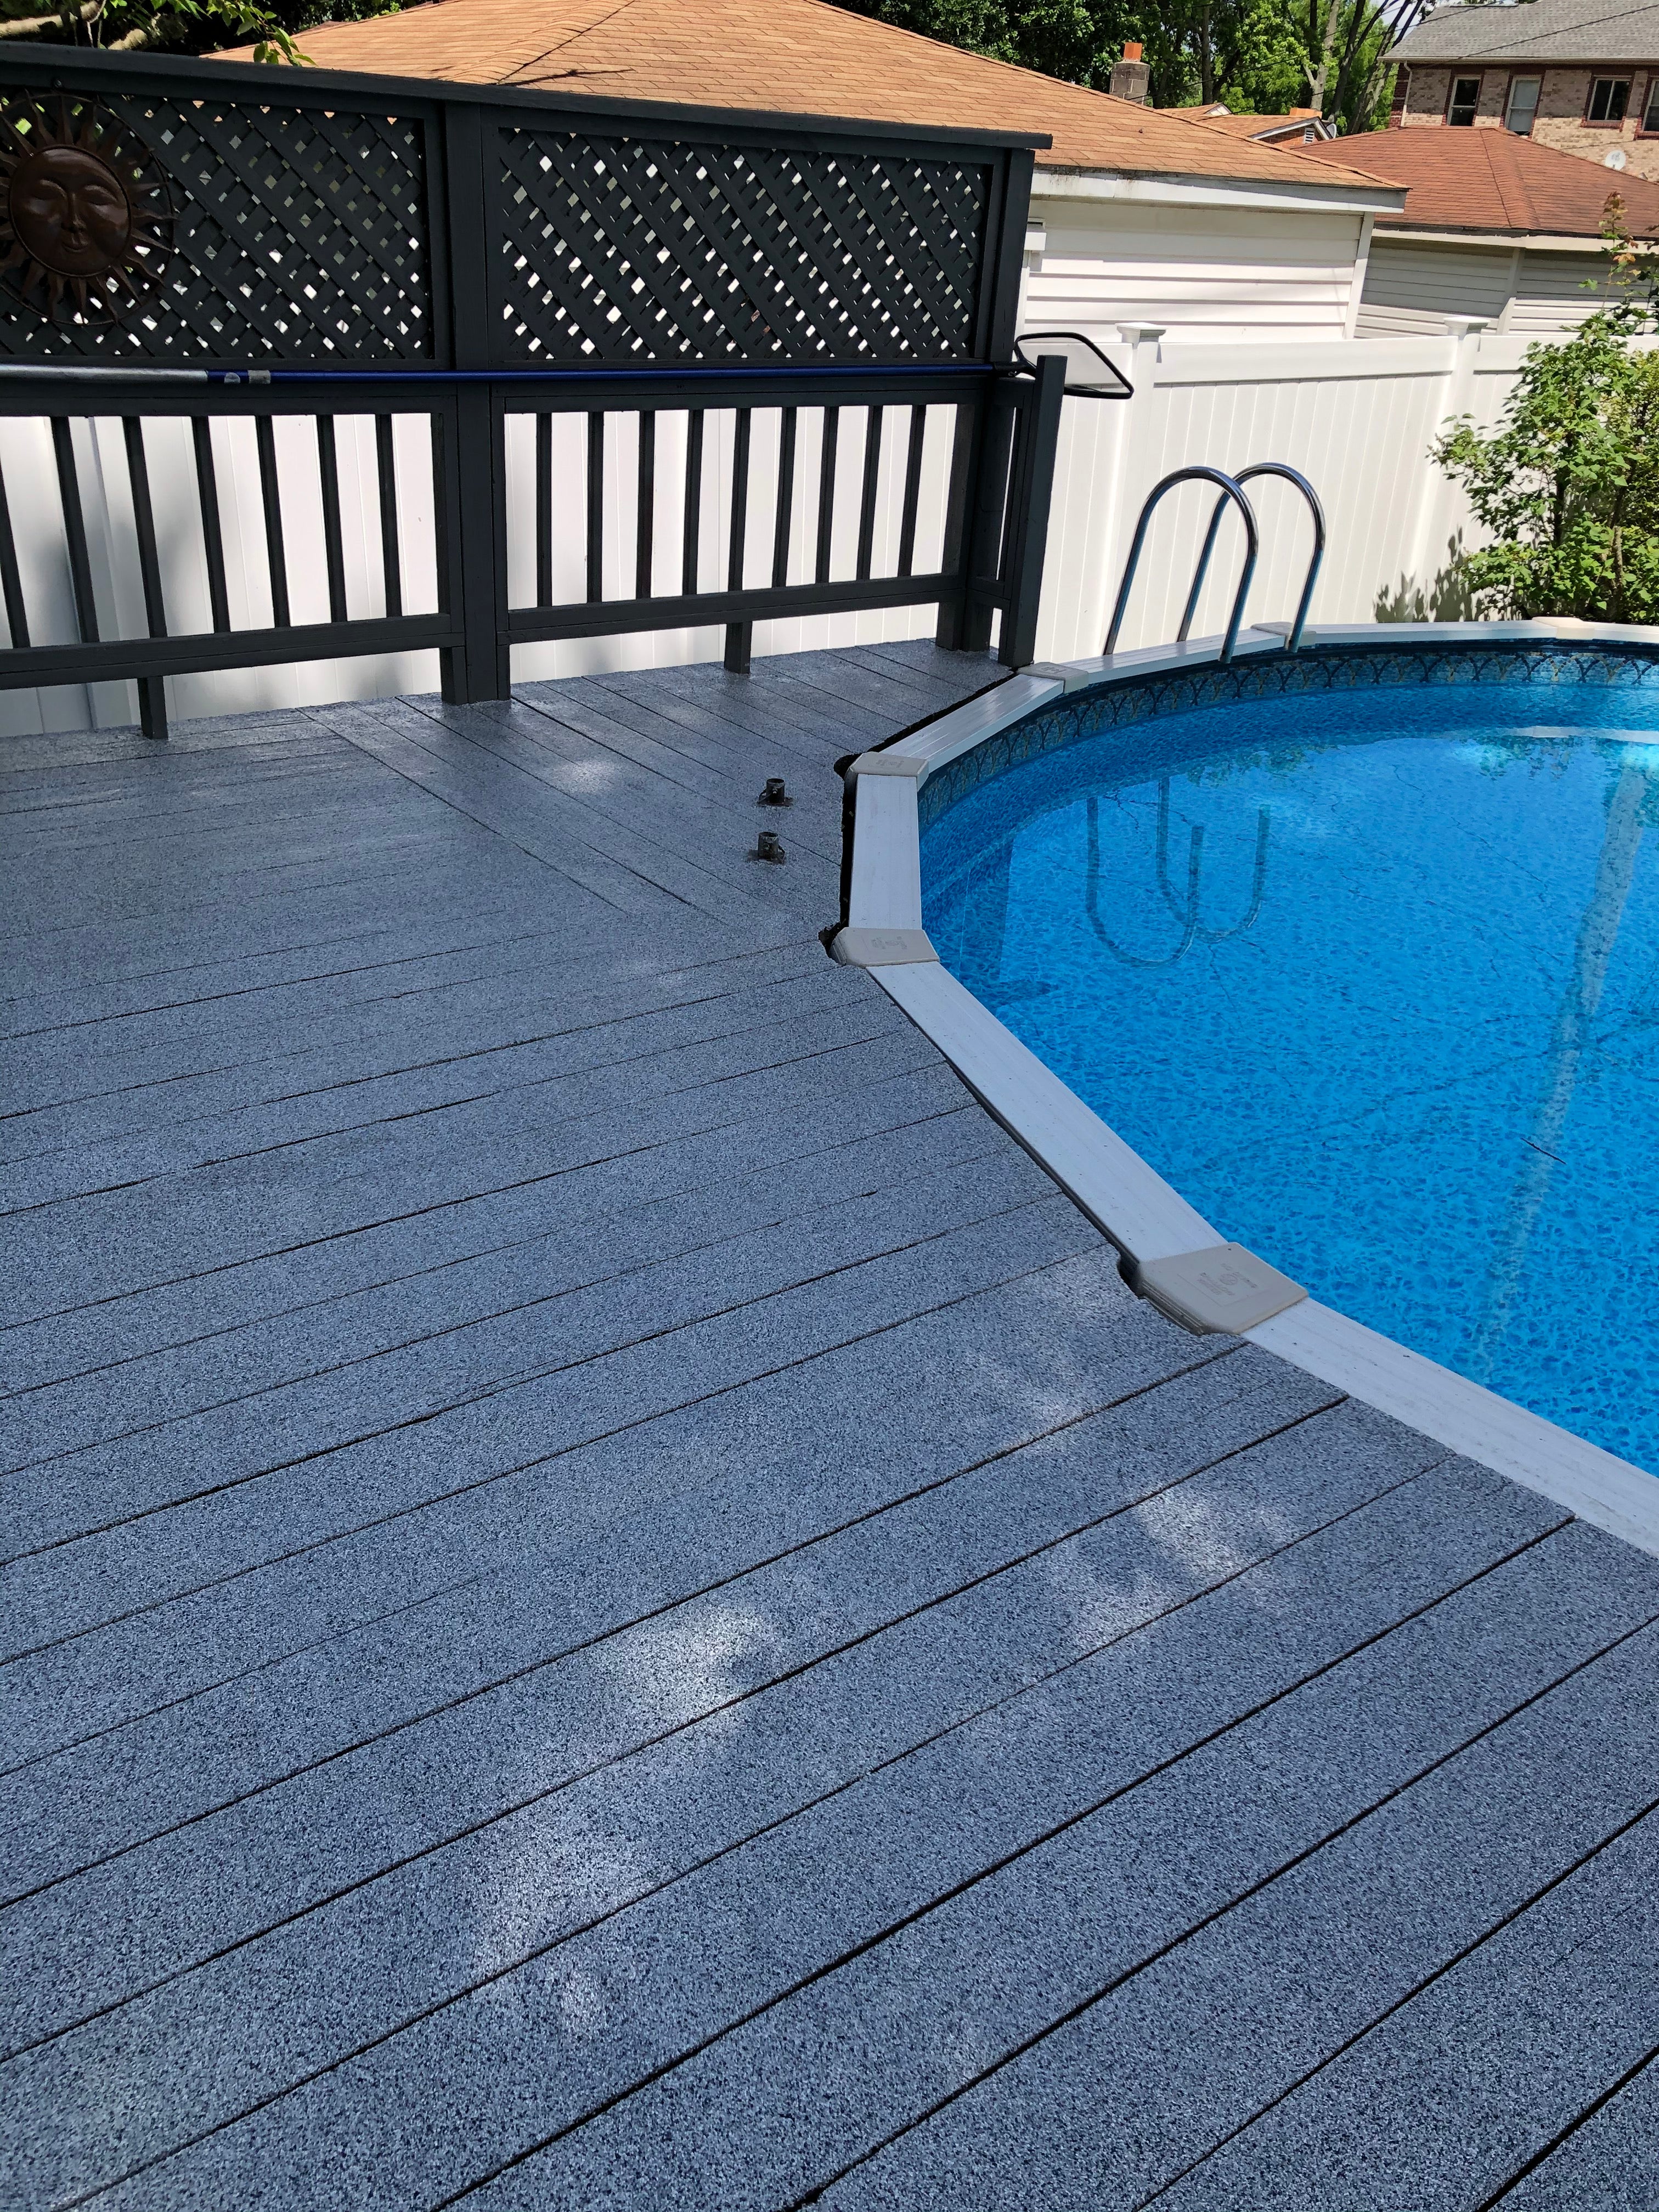 Deck And Patio Coatings - Epoxy & Polyaspartic Concrete Wood Deck & Patio Coating Kits